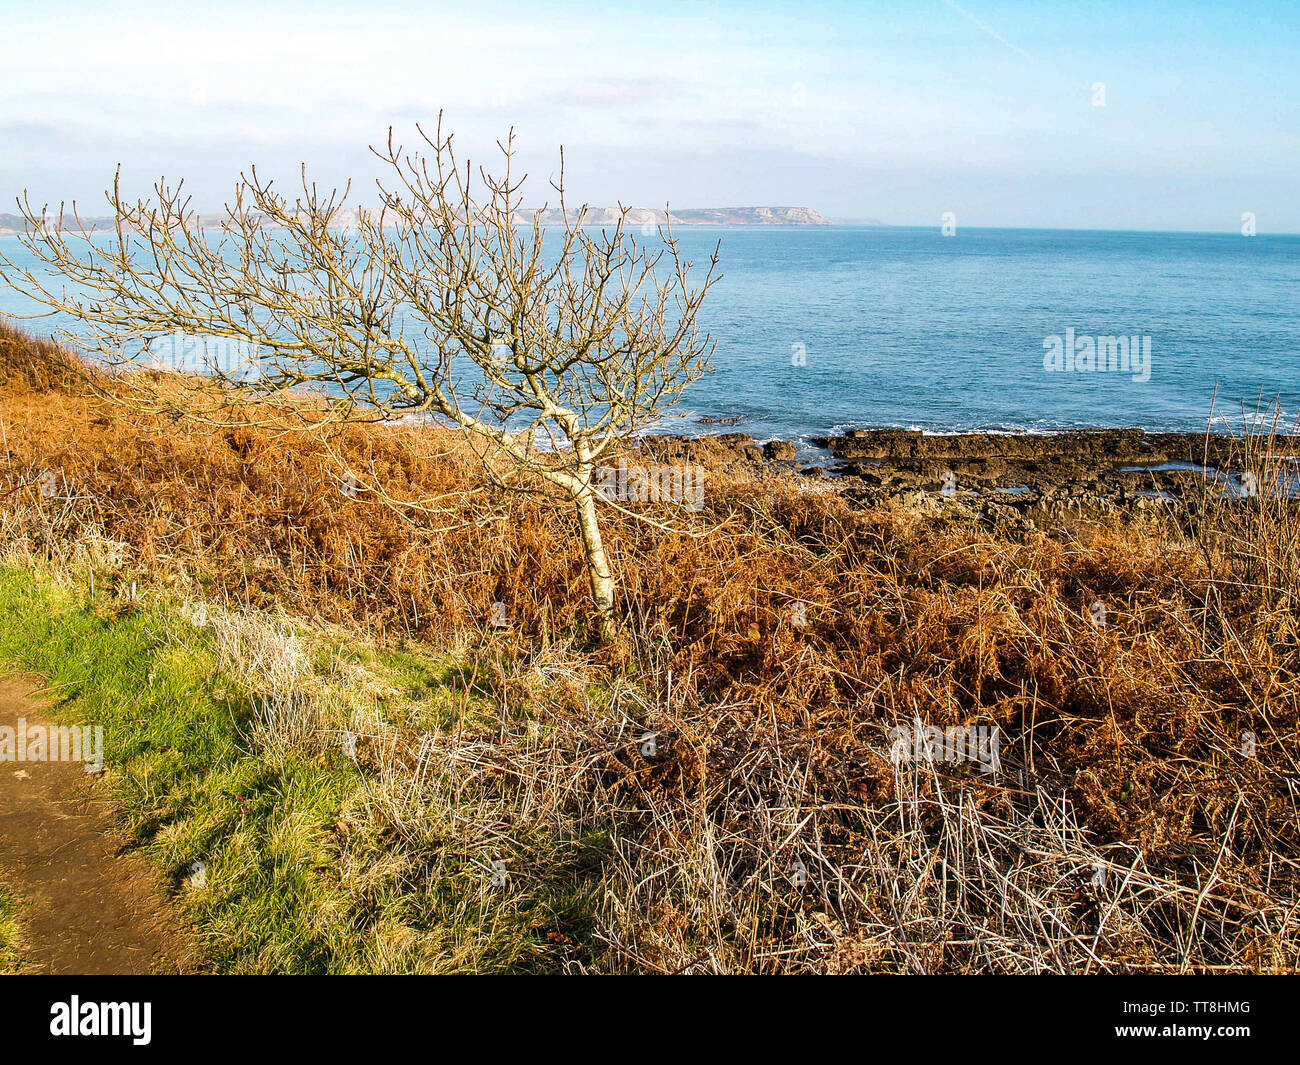 A view from the coastal footpath looking out over the sea with a windswept tree and bracken. Near Oxwich Point, Oxwich Bay, Gower, Wales, UK. Stock Photo